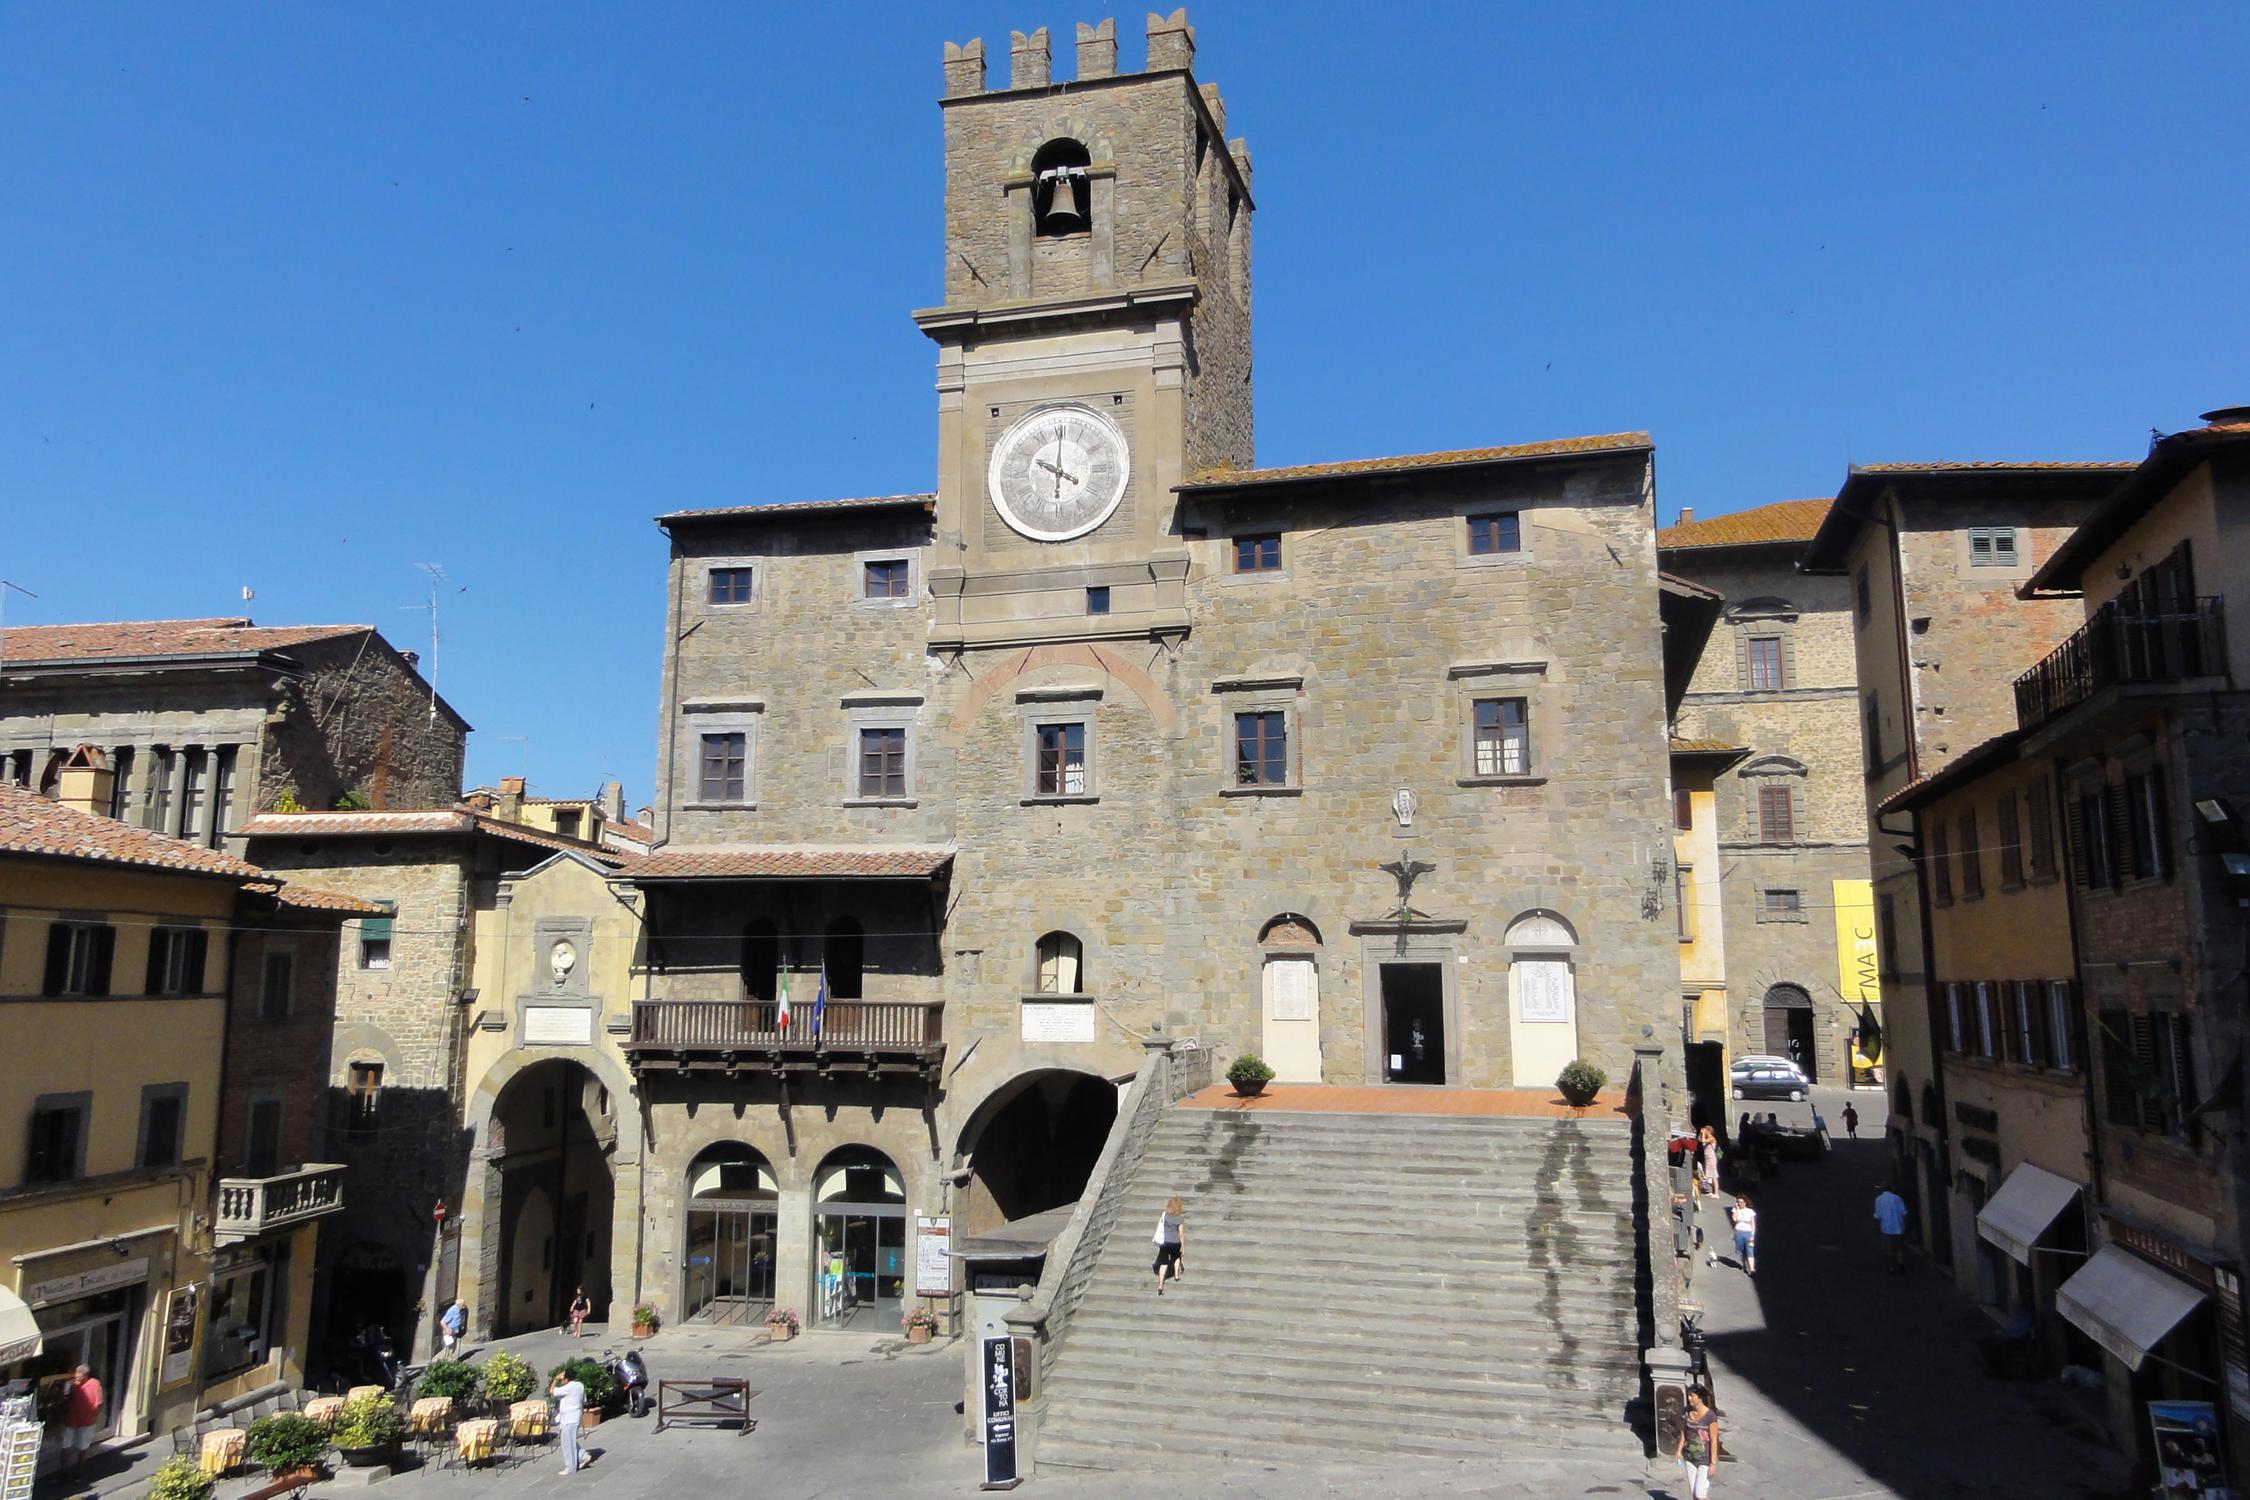 What to see in Tuscany and Umbria while staying at Casa Carlotta